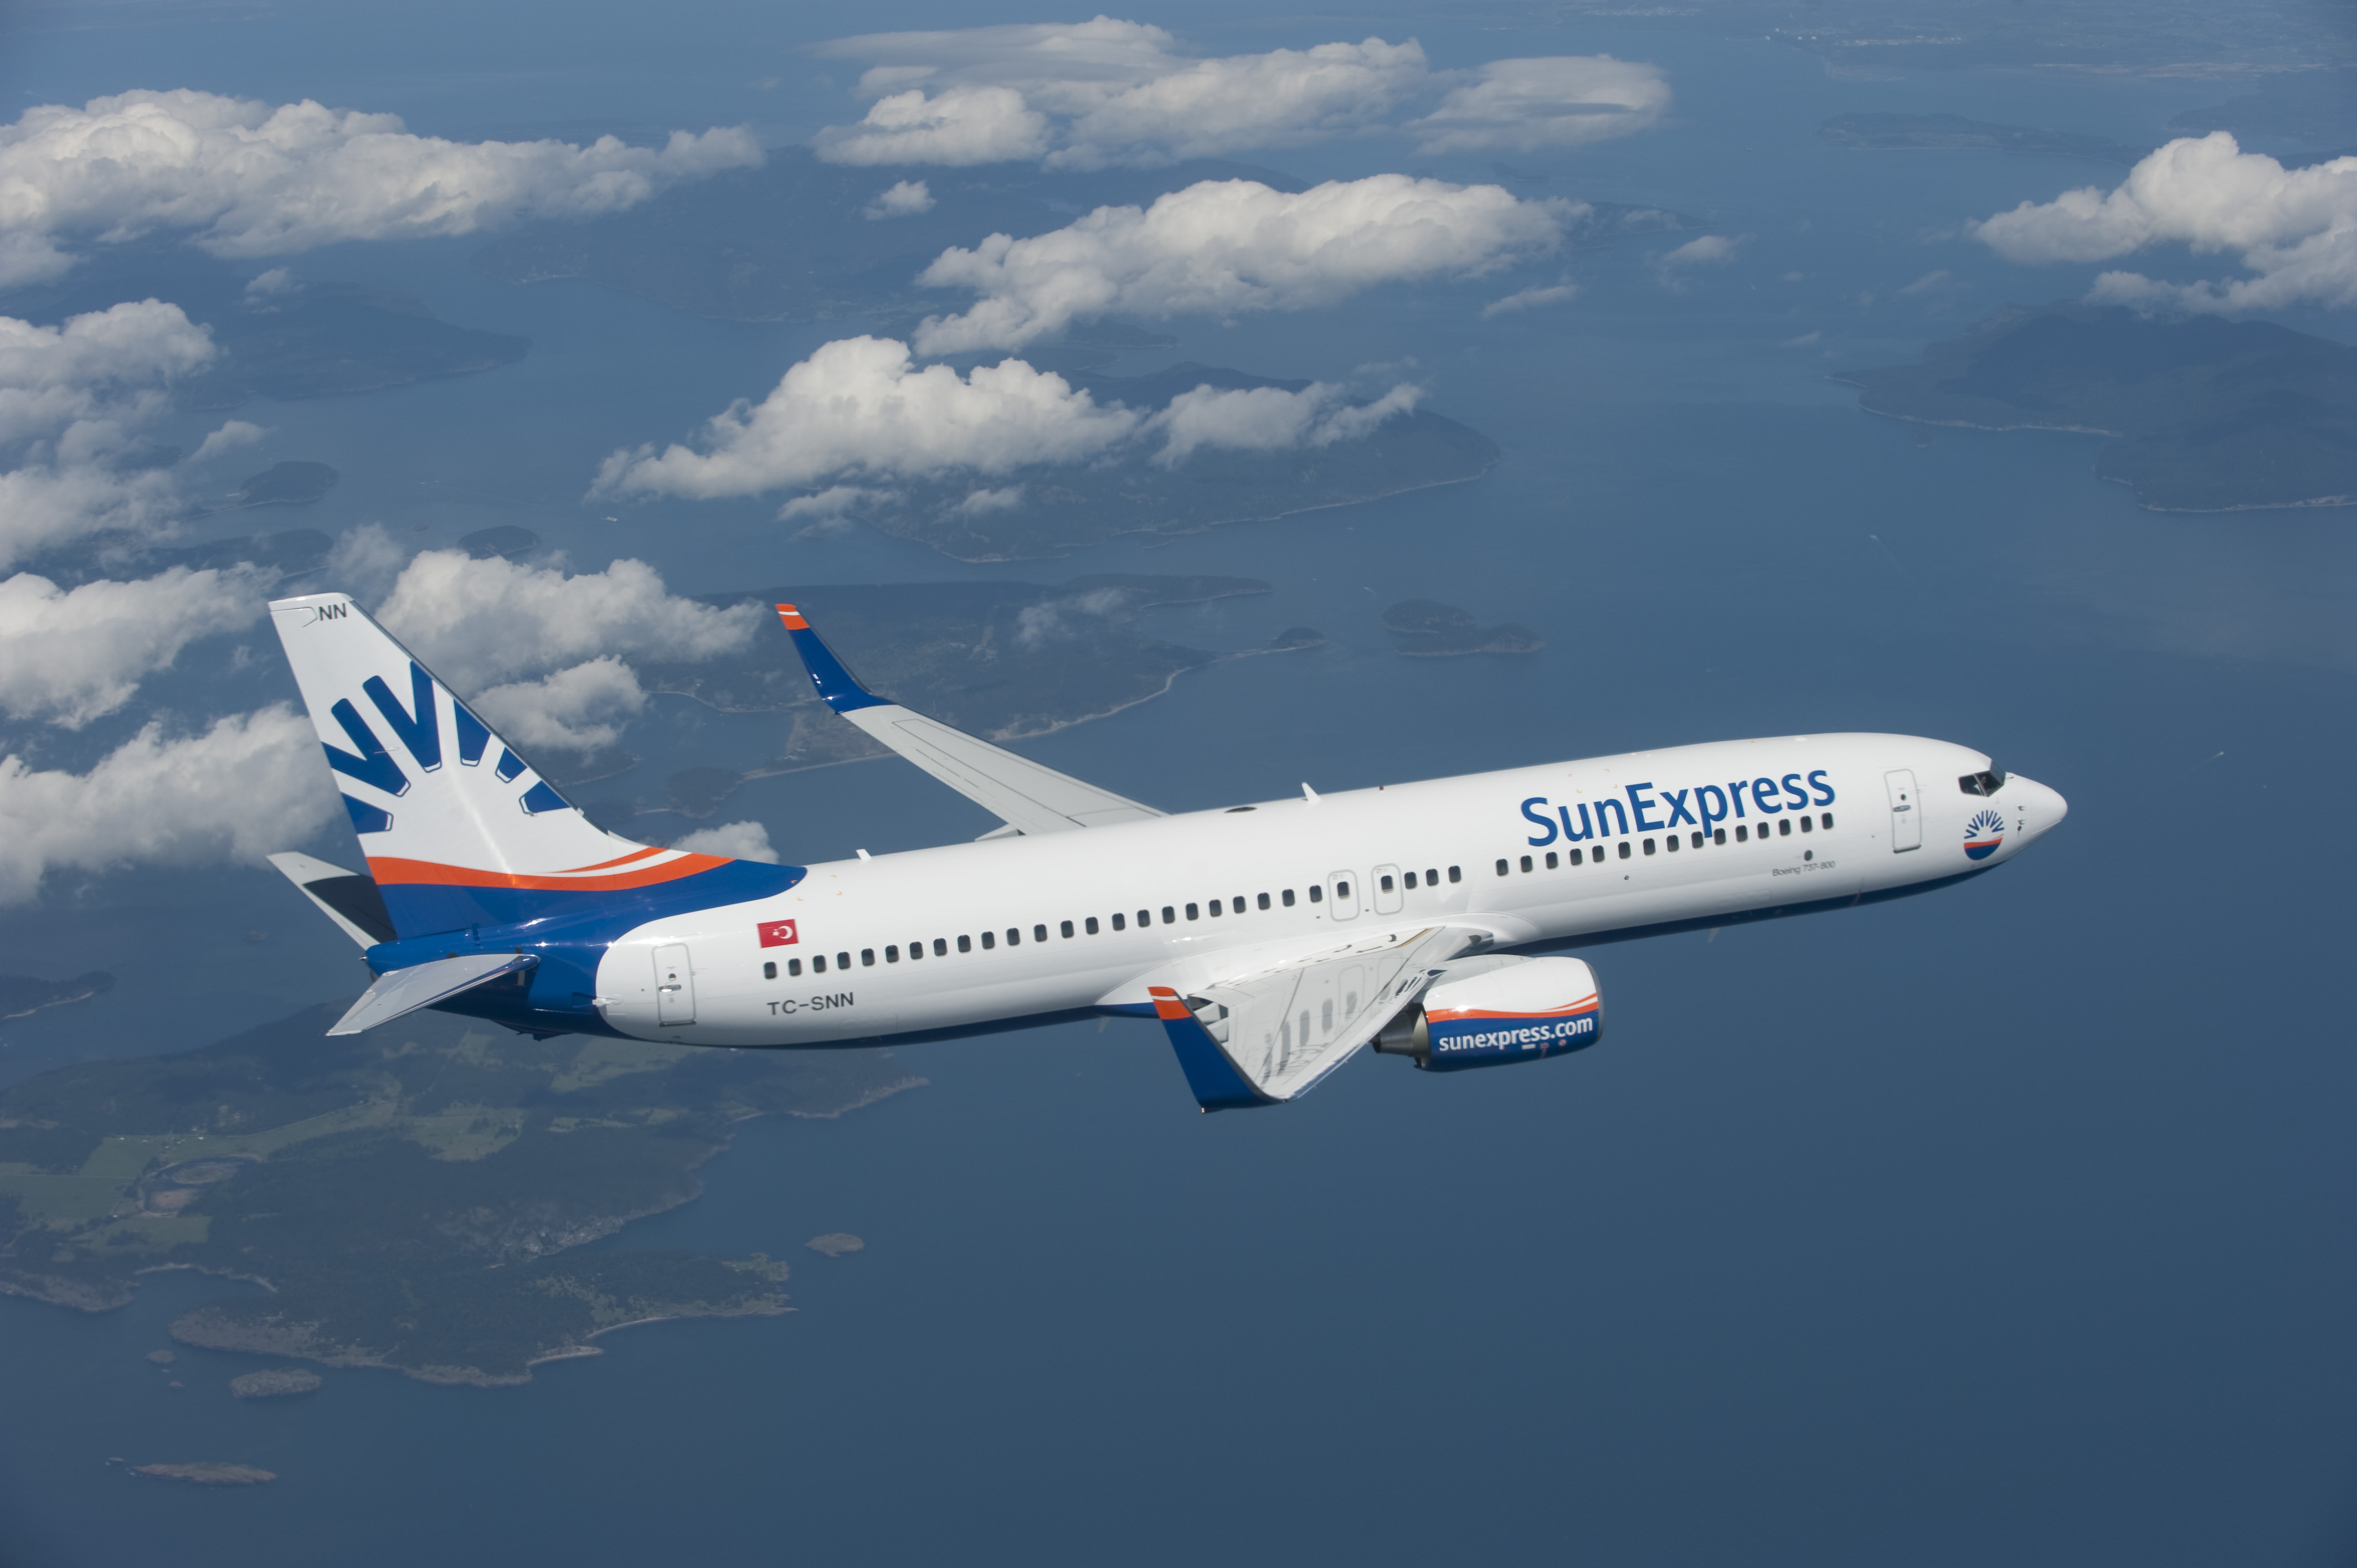 SunExpress Flights to the Middle East to Begin